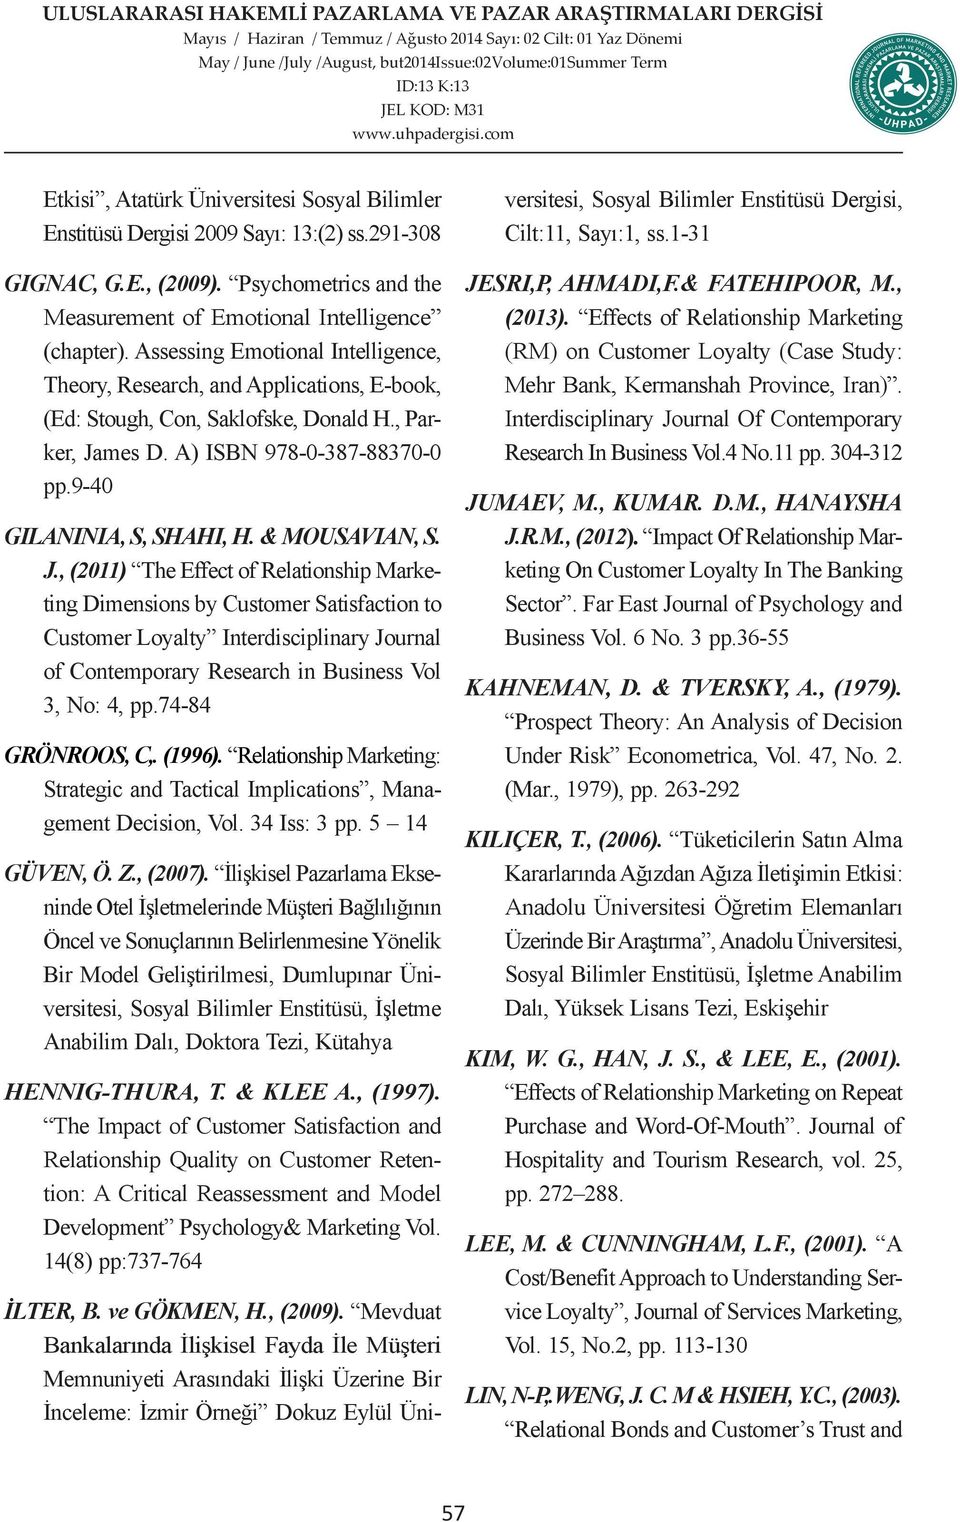 & MOUSAVIAN, S. J., (2011) The Effect of Relationship Marketing Dimensions by Customer Satisfaction to Customer Loyalty Interdisciplinary Journal of Contemporary Research in Business Vol 3, No: 4, pp.